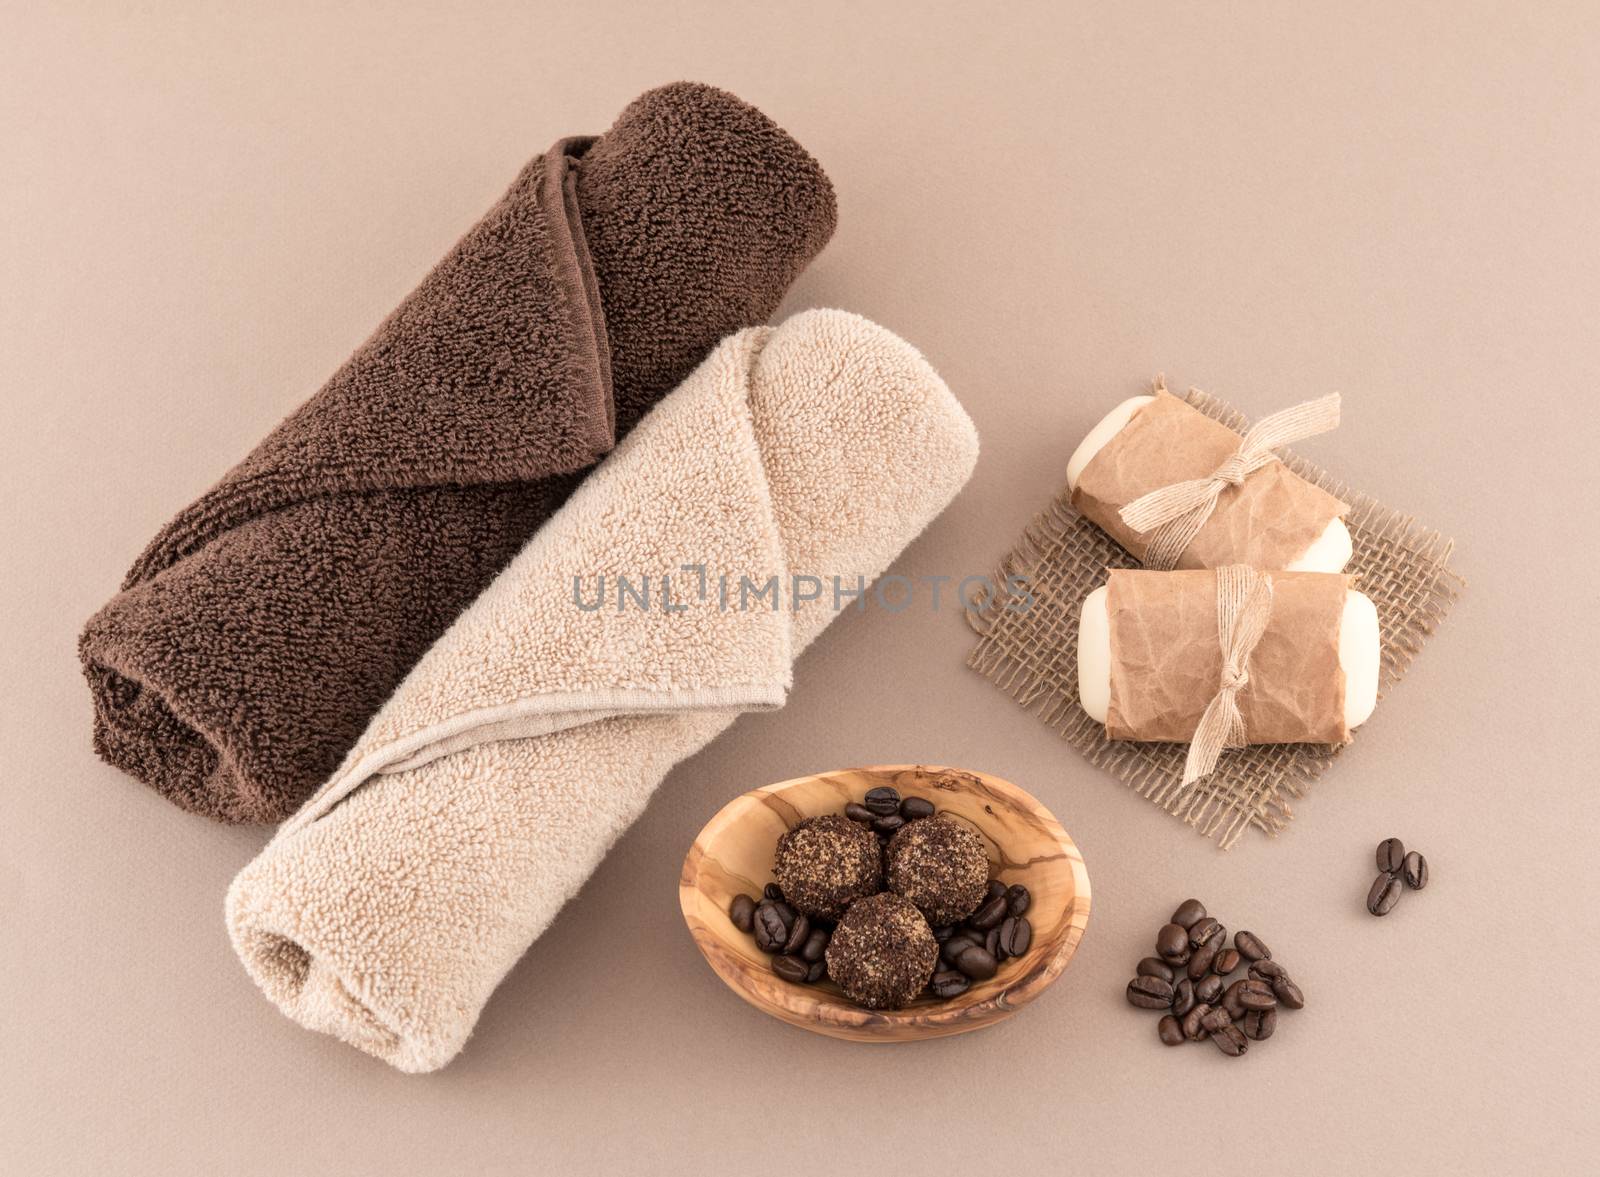 Bath Bombs, Spa Soap, and Luxury Towels by krisblackphotography